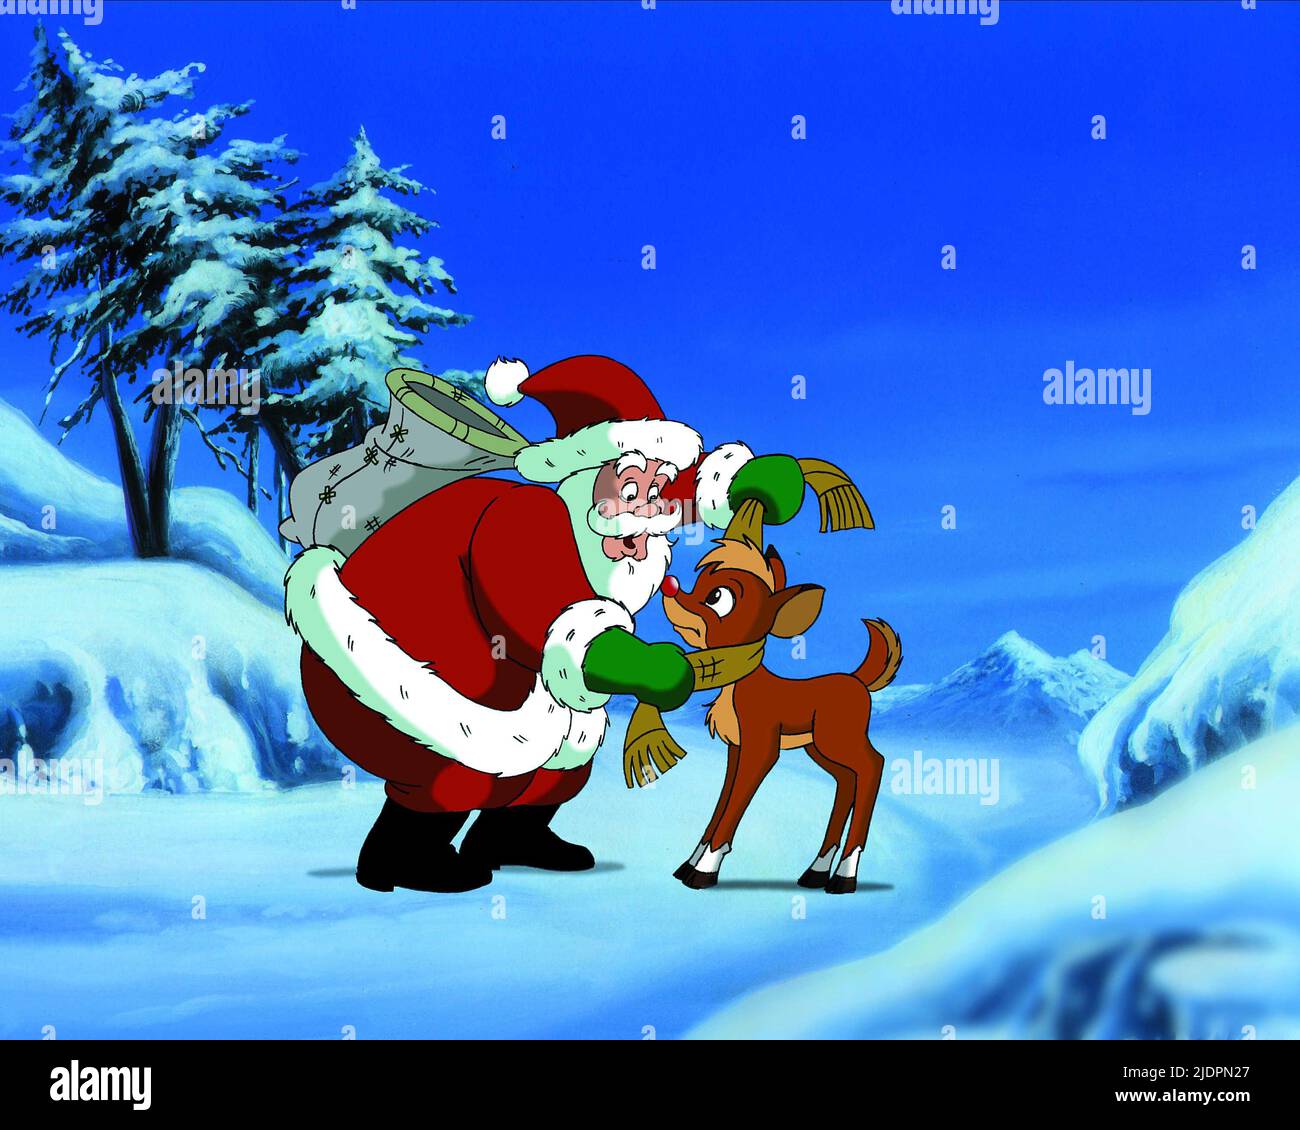 CLAUSE,RUDOLPH, RUDOLPH THE RED-NOSED REINDEER, 1998 Stock Photo